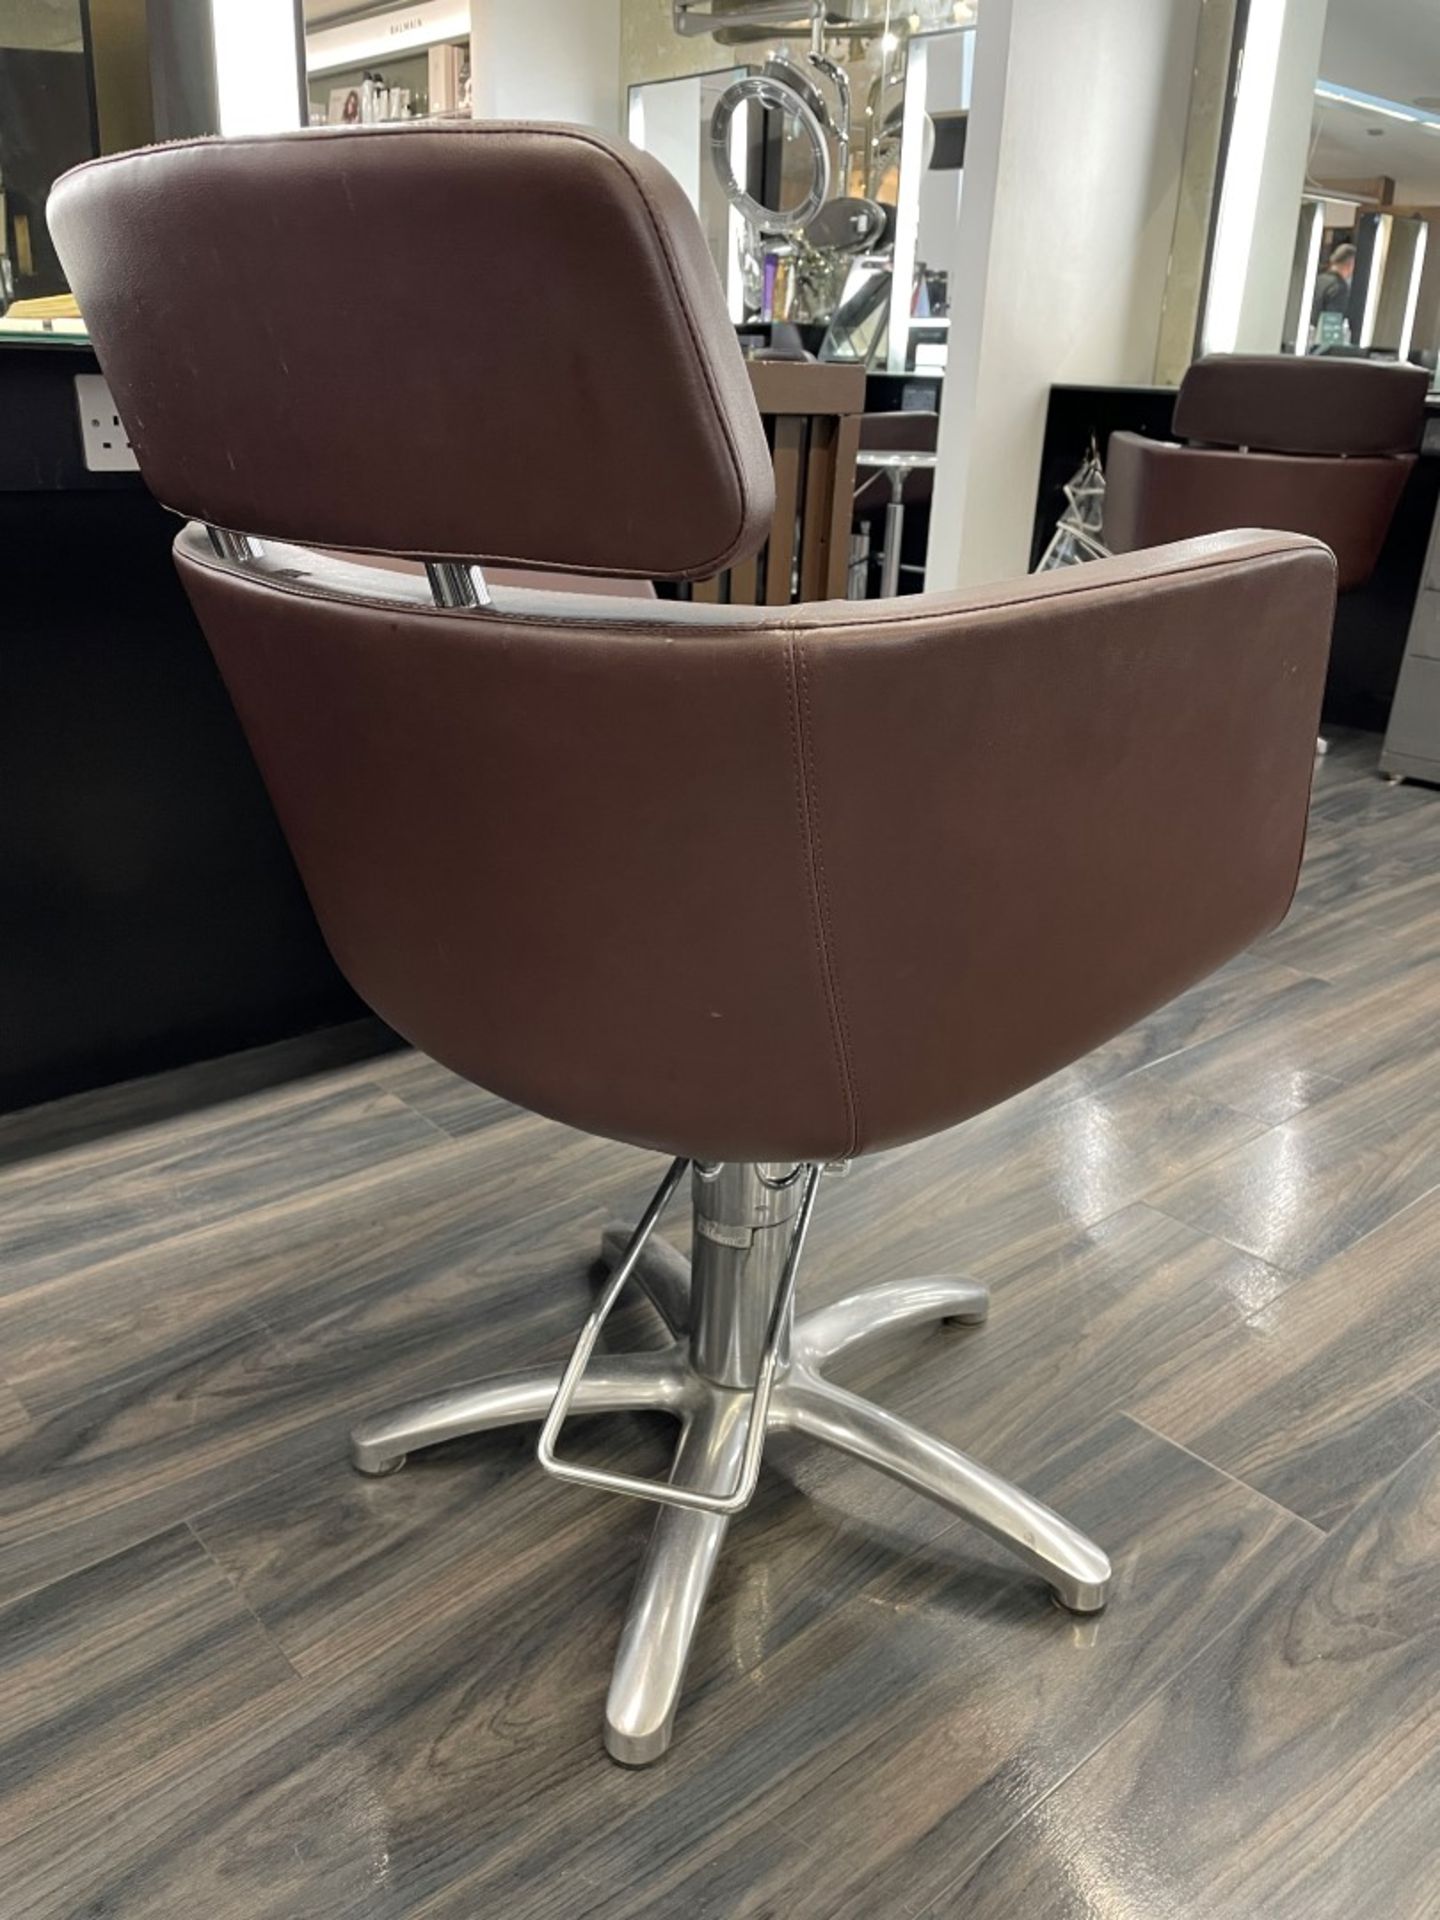 5 x Malet Branded Professional Hairdressing Salon Swivel Chairs In Brown - Each Is Supplied With A - Image 3 of 7